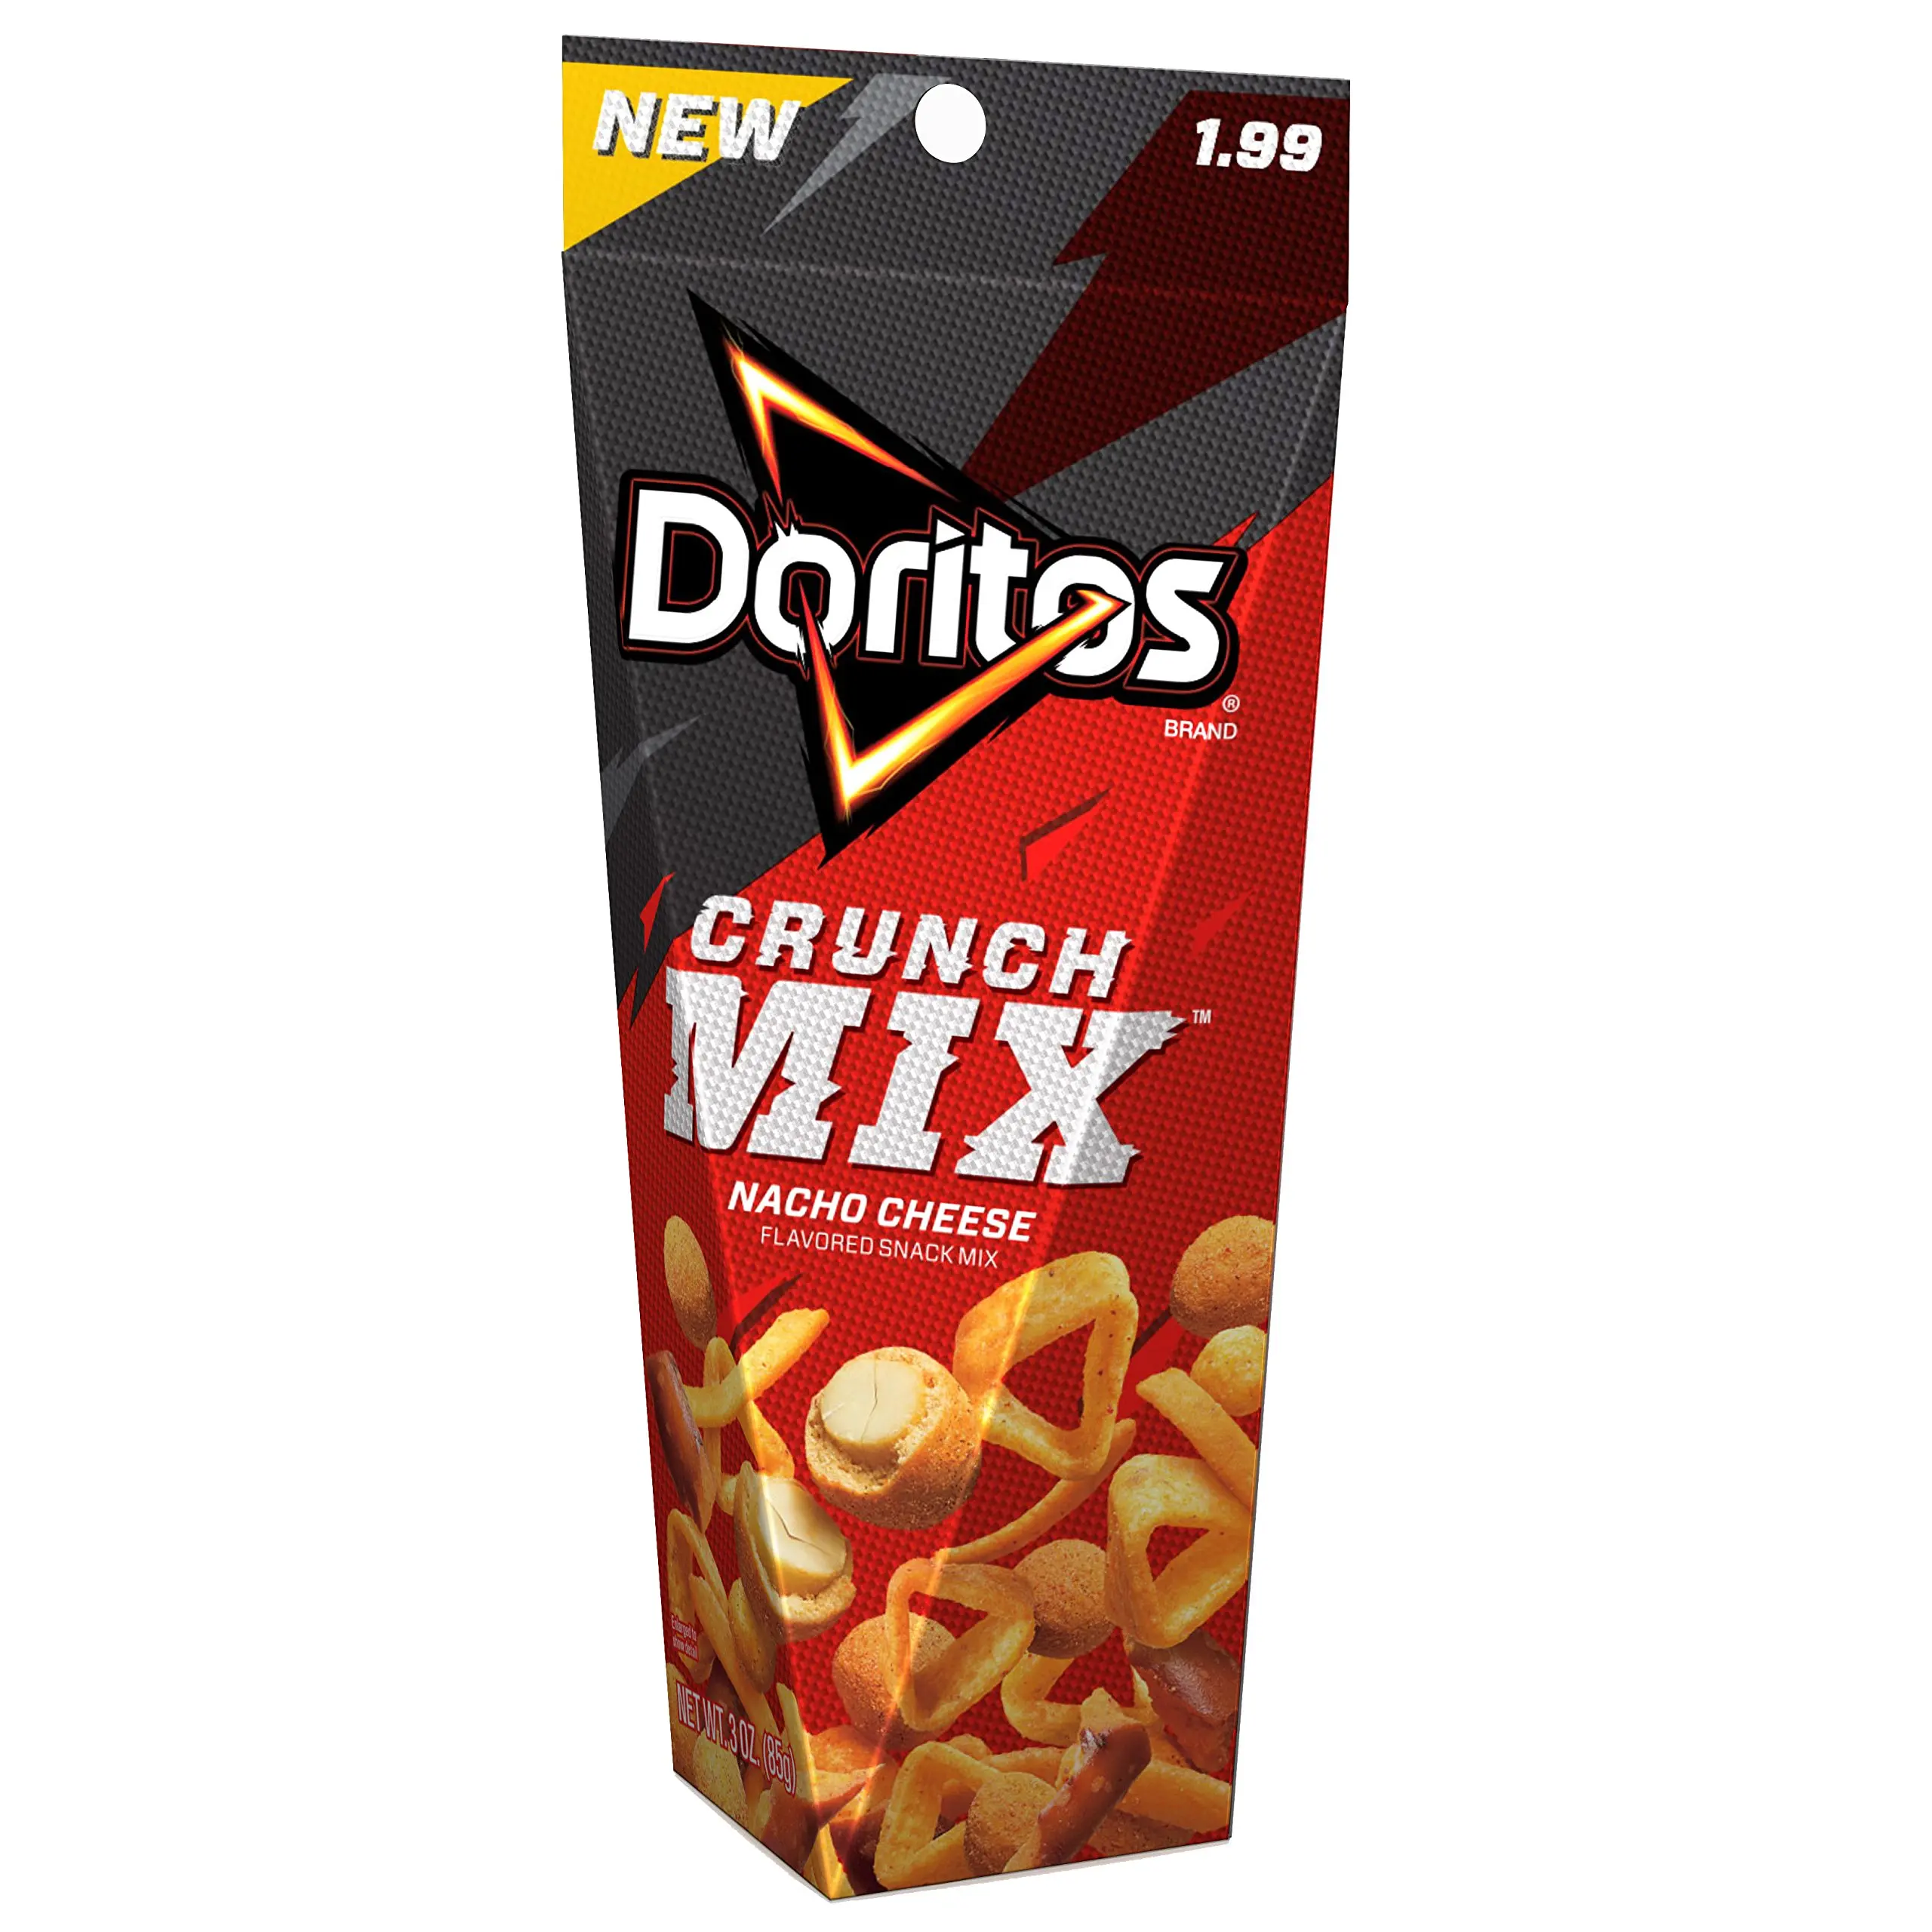 31.15. Doritos Crunch Mix is a delicious mix of Nacho Cheese flavor with cr...